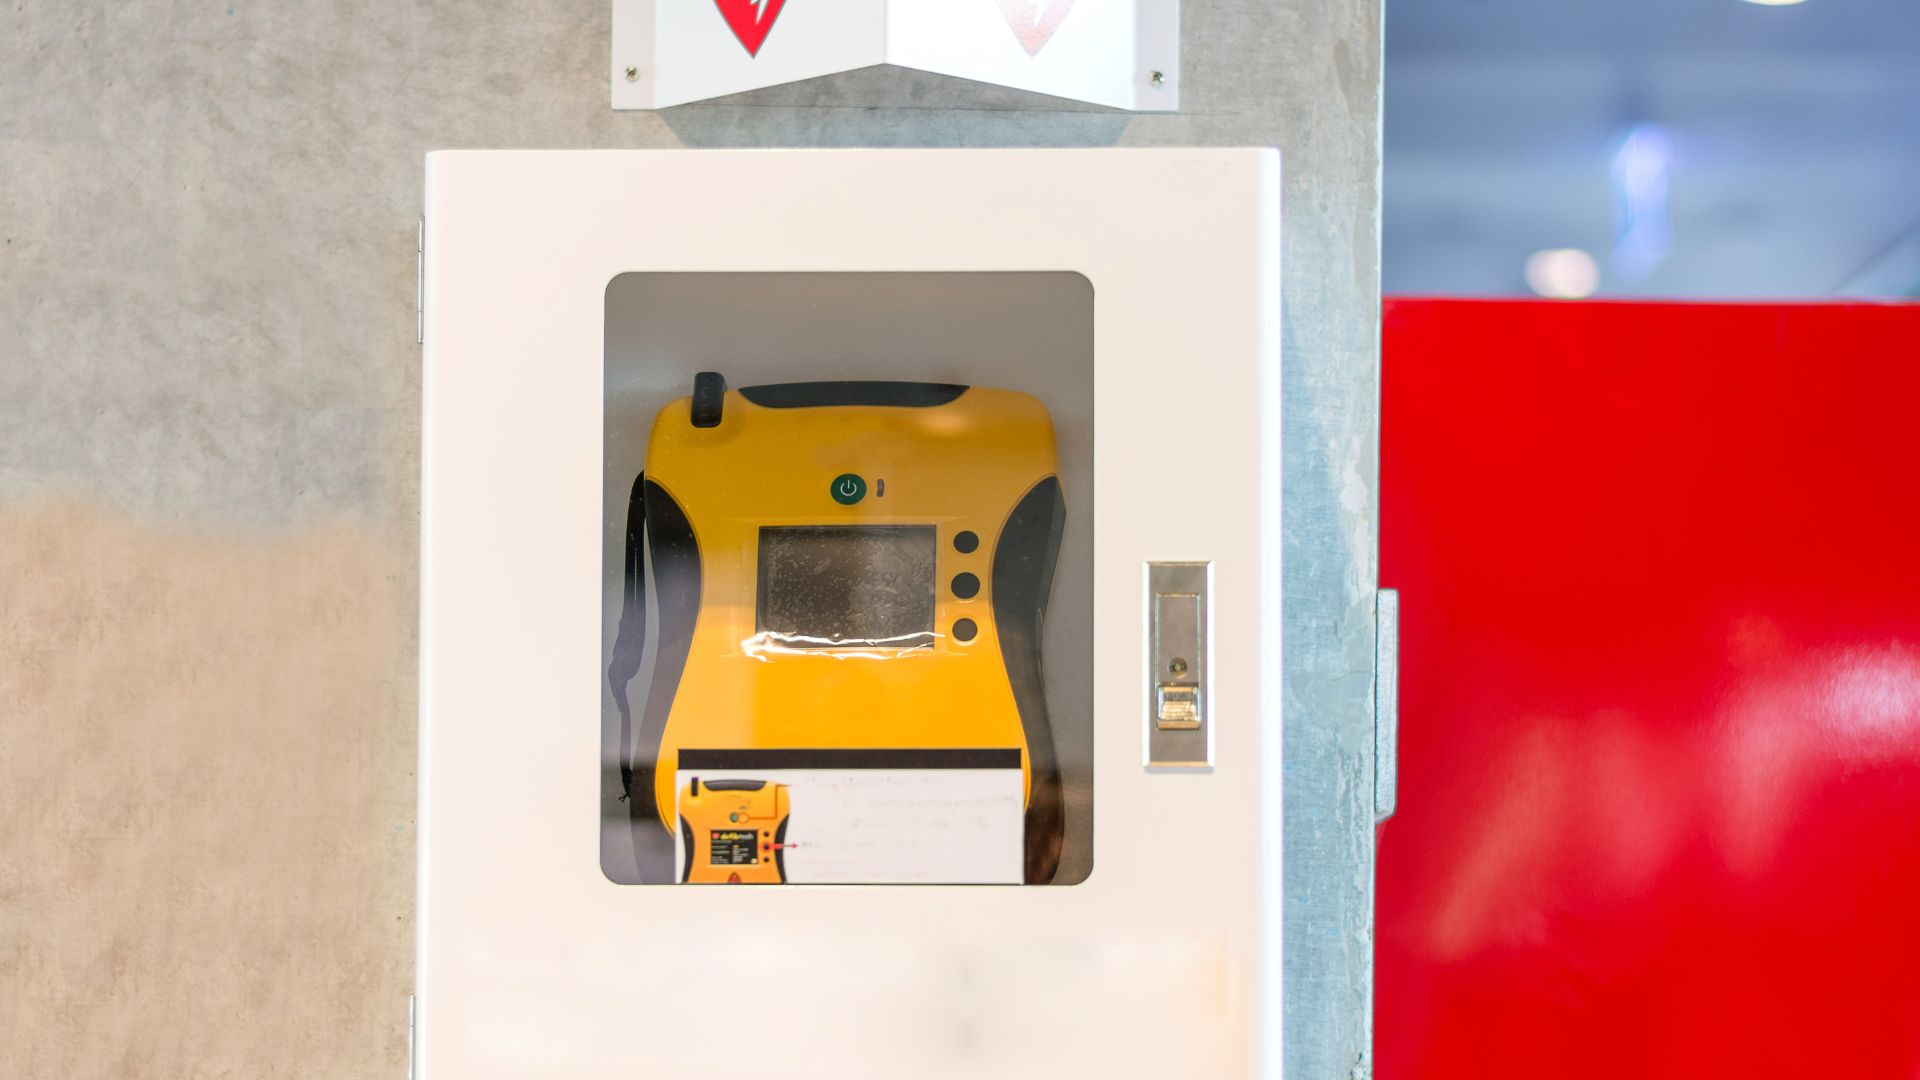 AED Maintenance: How to Ensure Your Device Is Ready